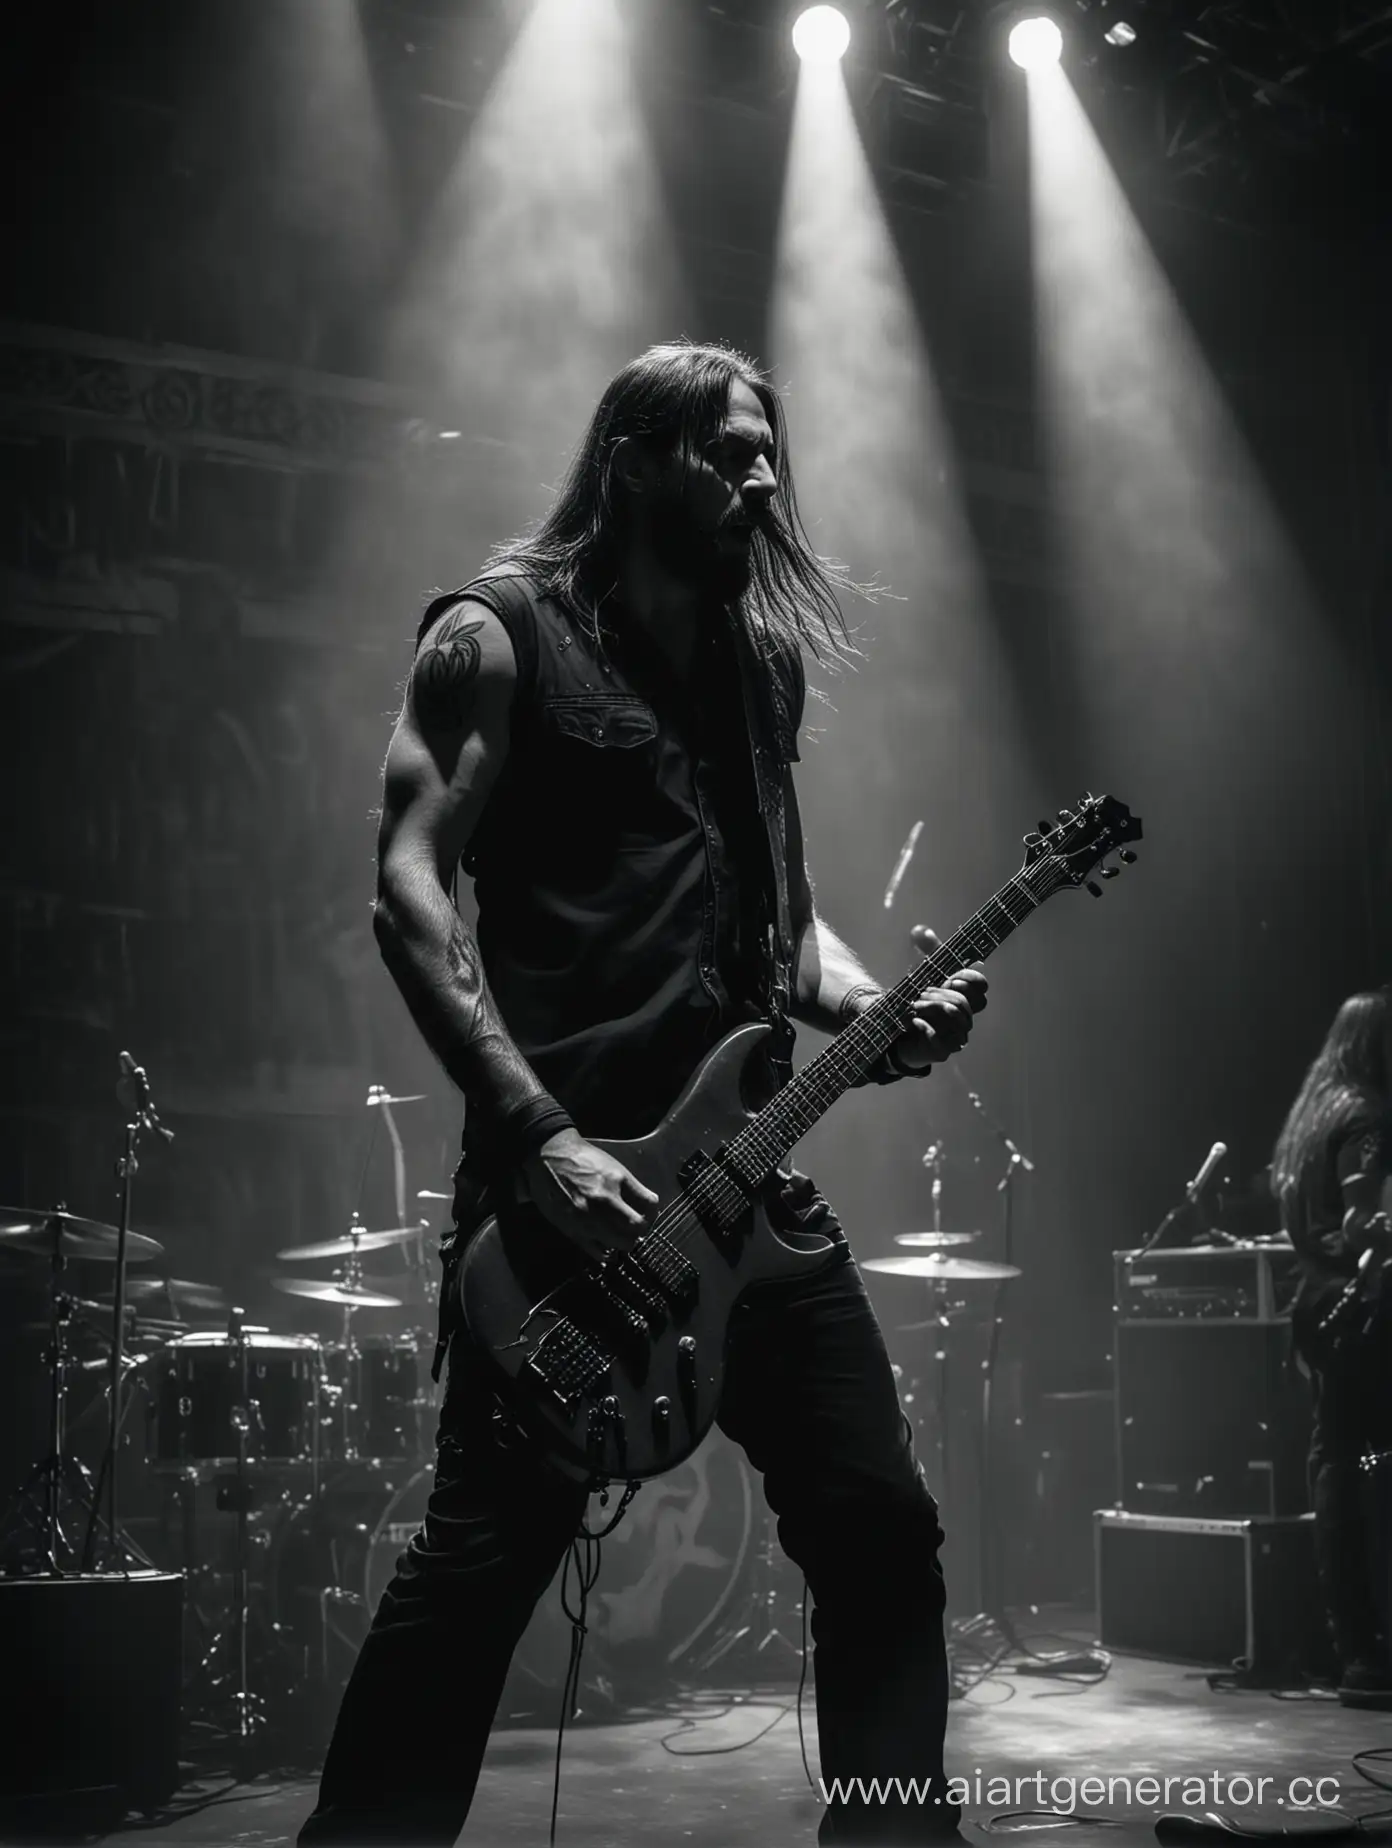 A on stage hyperrealistic photo of the greek metal band Rotting Christ playing a concert on stage. Dark atmosphere, dimmed lights